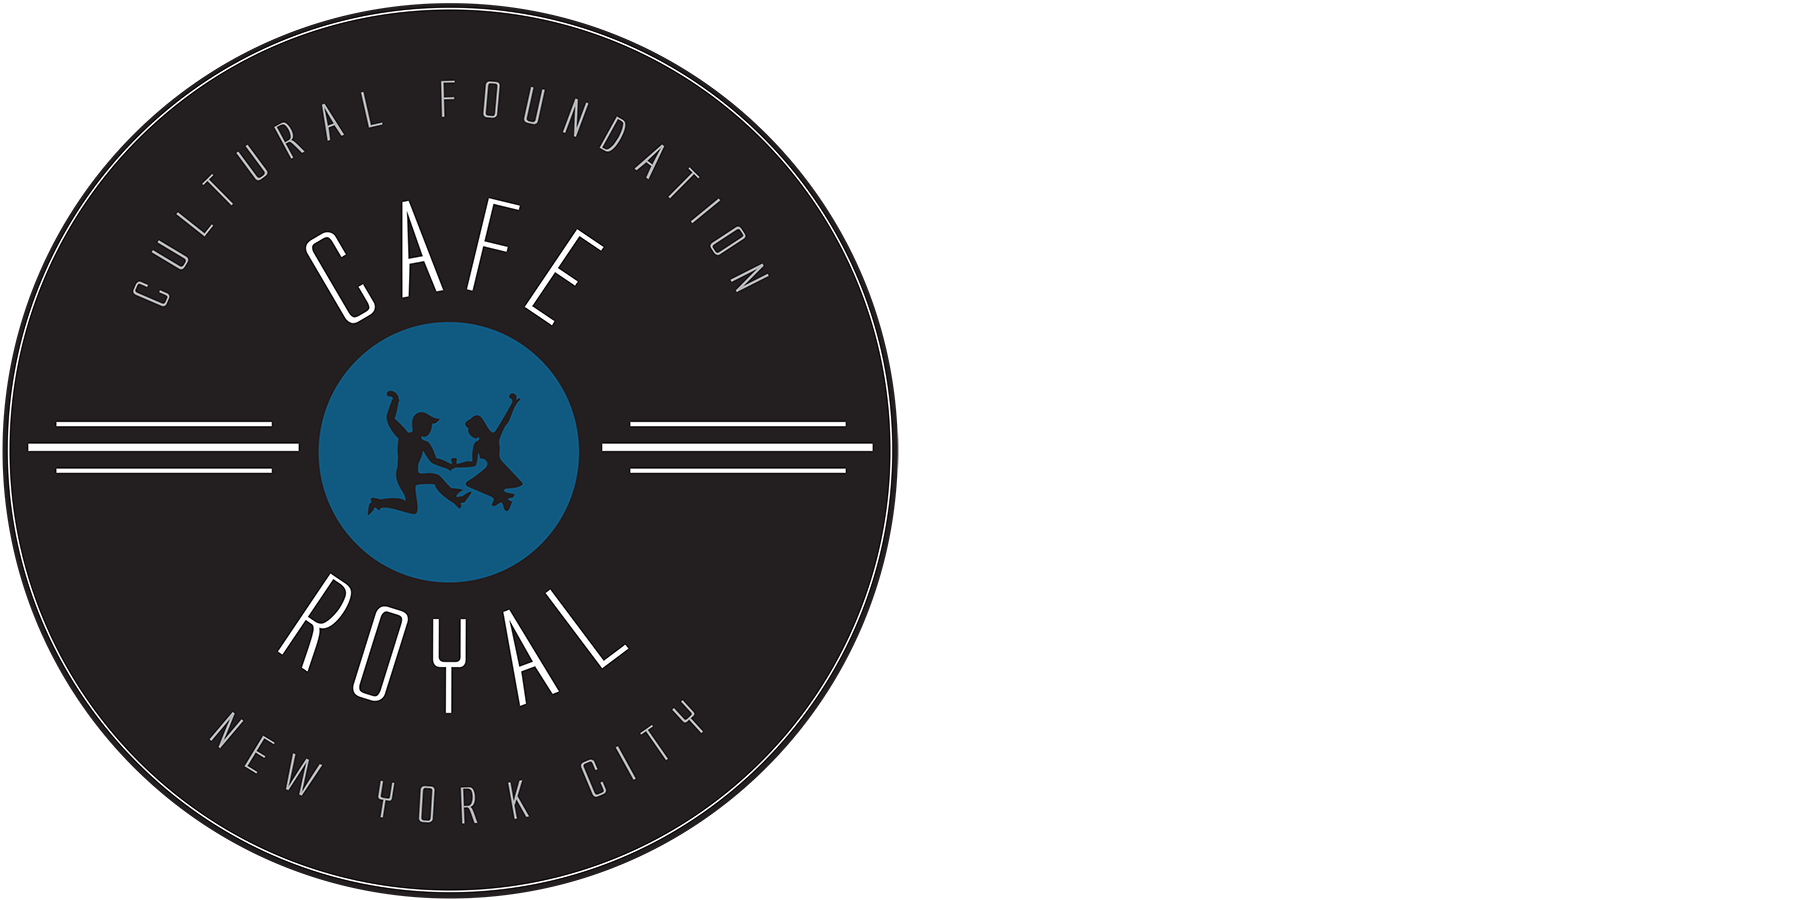 Cafe Royal Cultural Foundation logo. The black, circular logo resembles a vinyl record with a blue circle at the center as a background to two dancing figures leaping in the air.